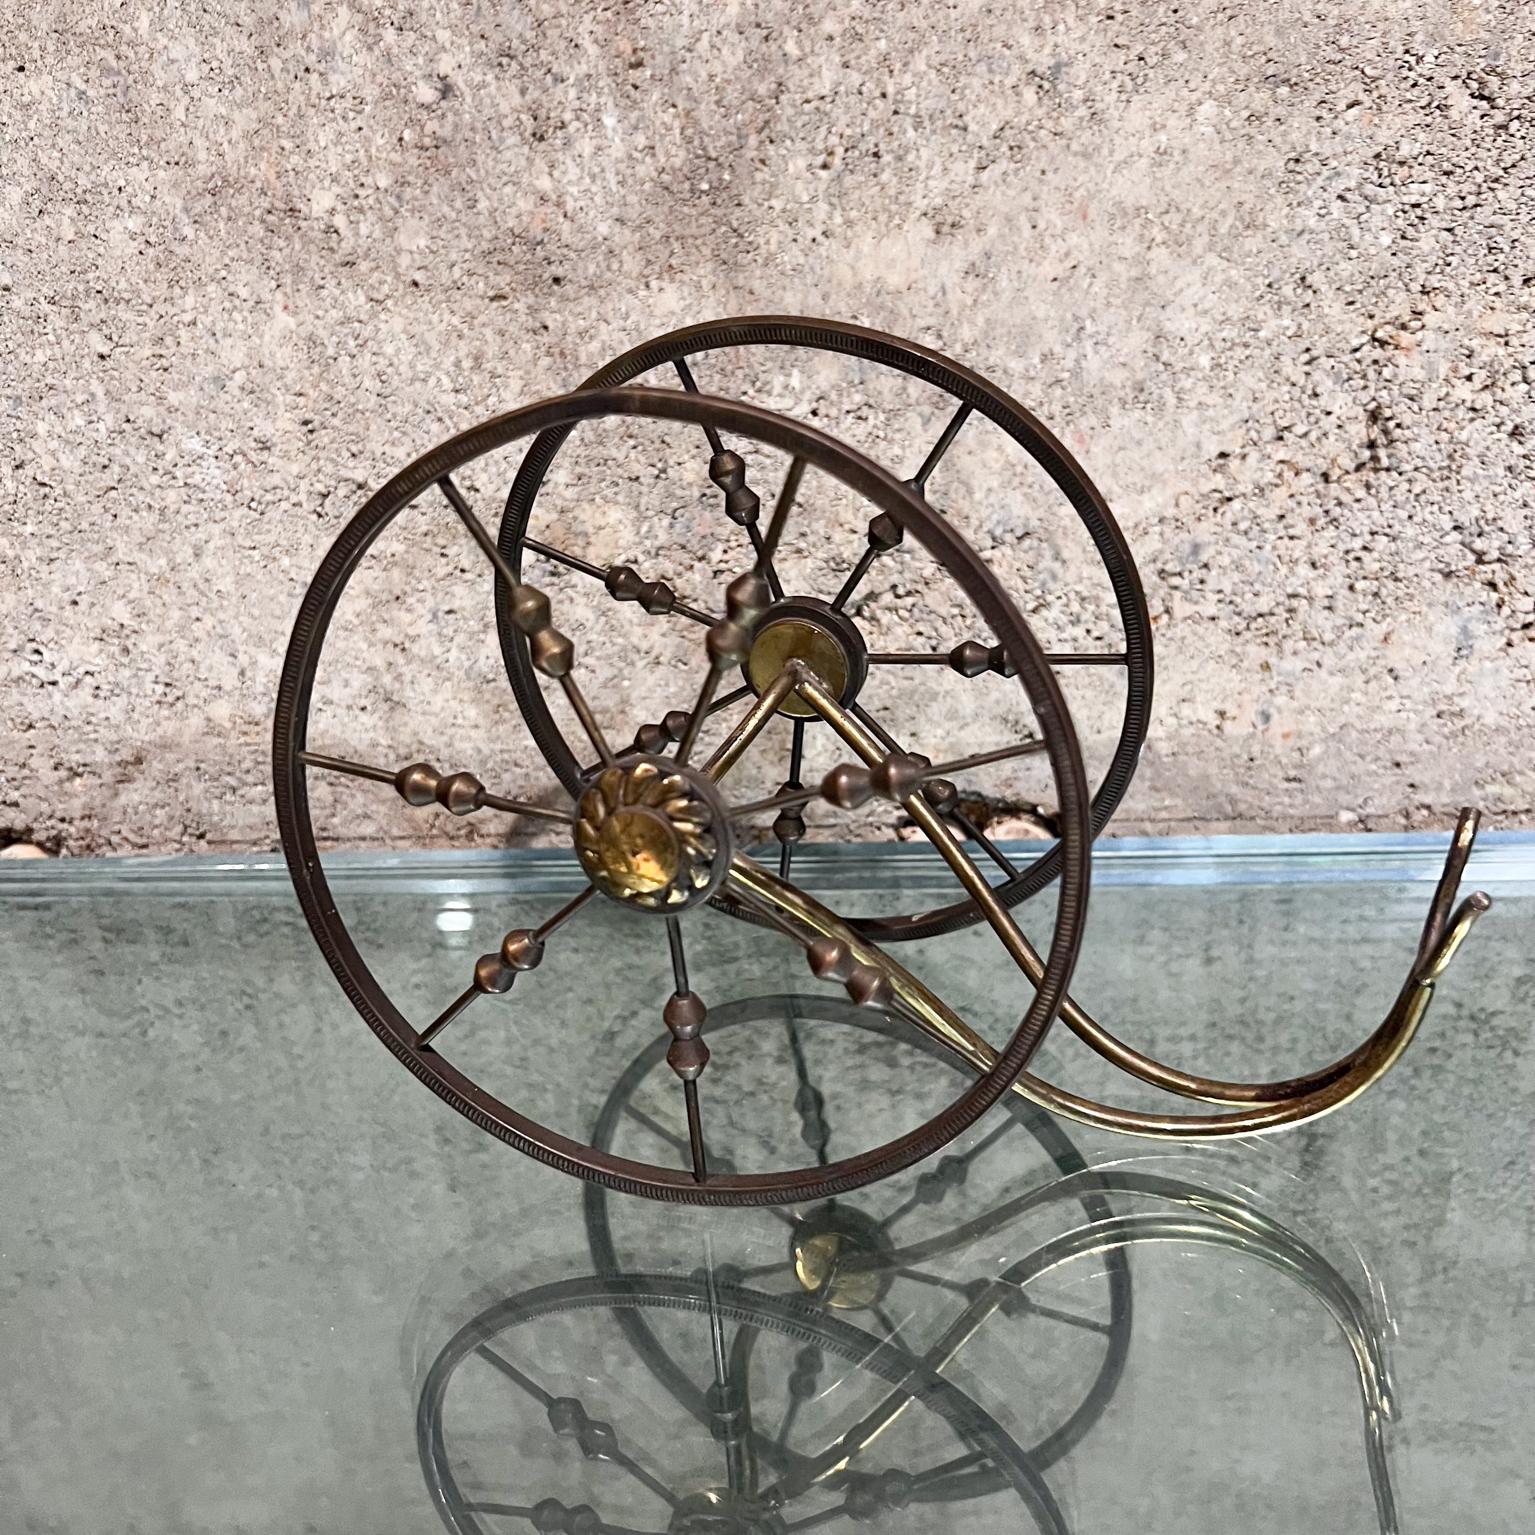 1950s Small Wine Bottle Holder Brass Spoke Wheel made Italy In Good Condition For Sale In Chula Vista, CA